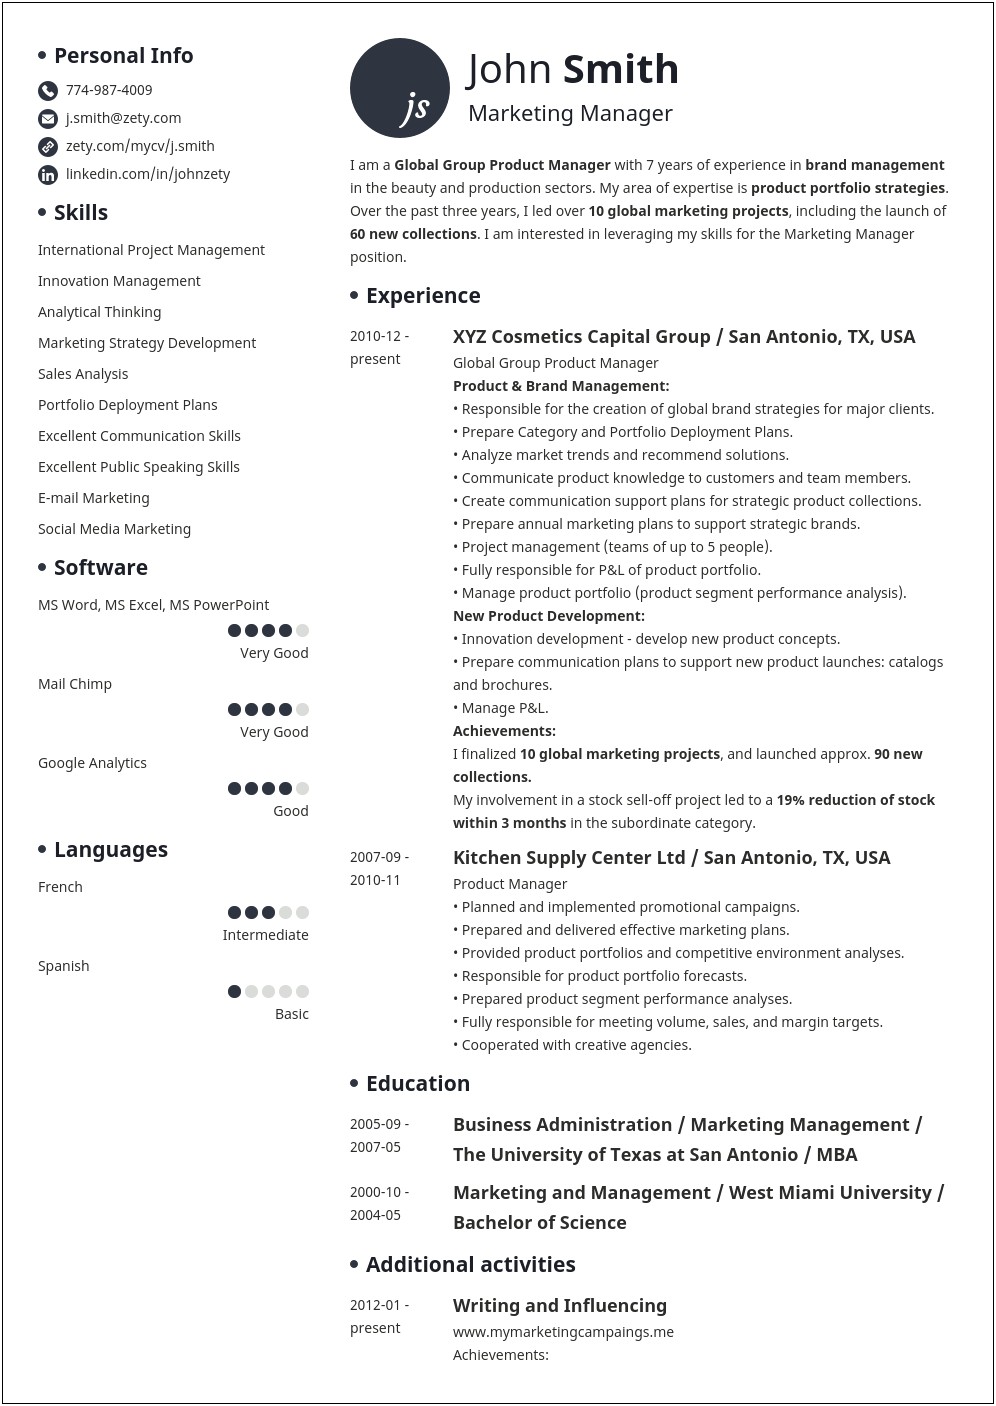 Best Way To Education Resume